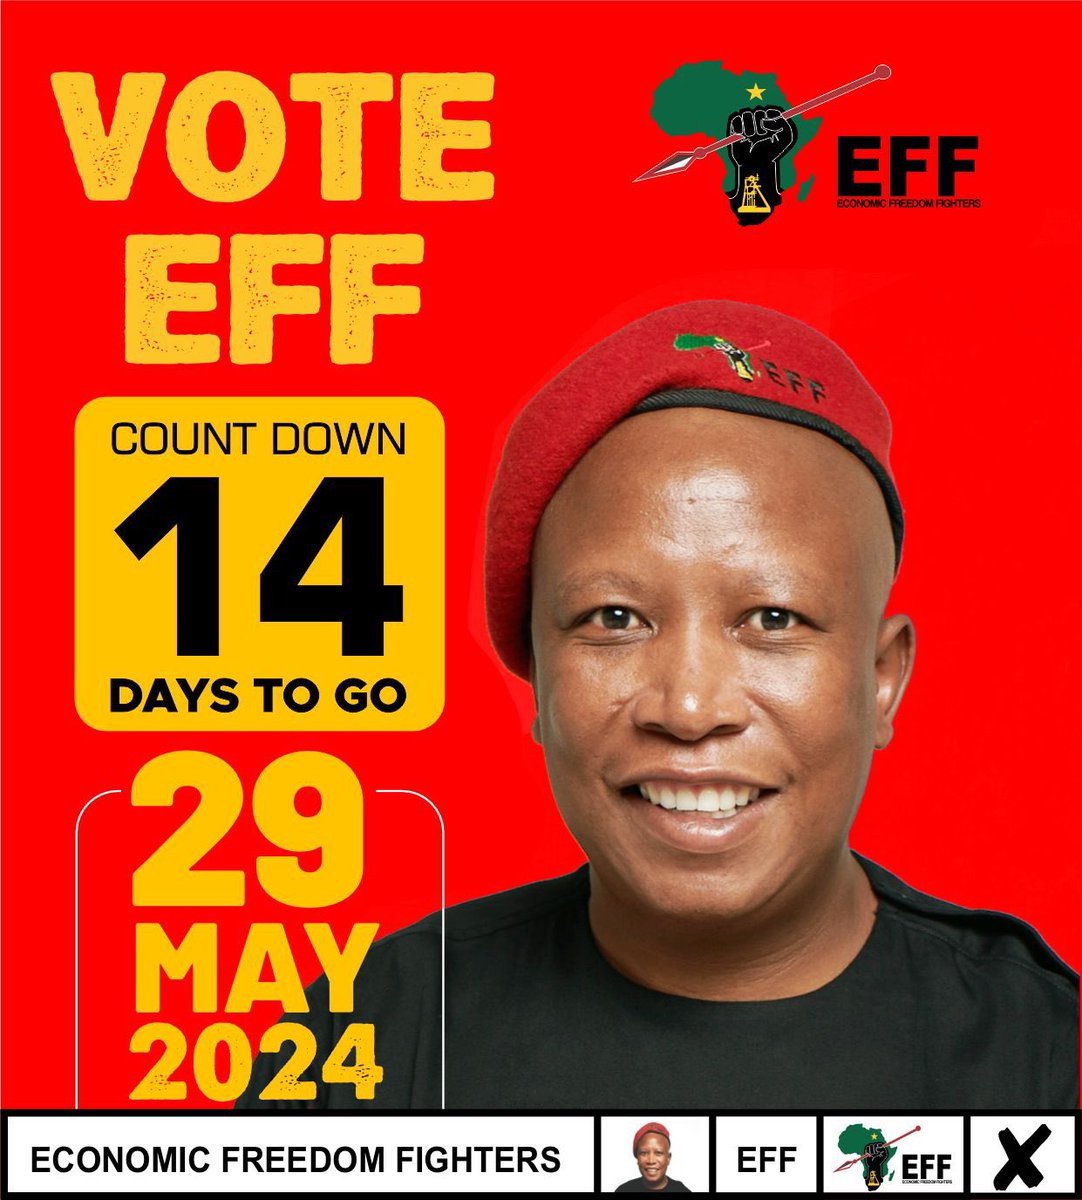 ♦️14 Days To Go♦️

We remain resolute that the EFF government will expropriate all LAND without compensation for equal redistribution, create millions of jobs through re-industrialisation using the state, stop load shedding, & rebuild our education system.

#VukaVelaVotaEFF